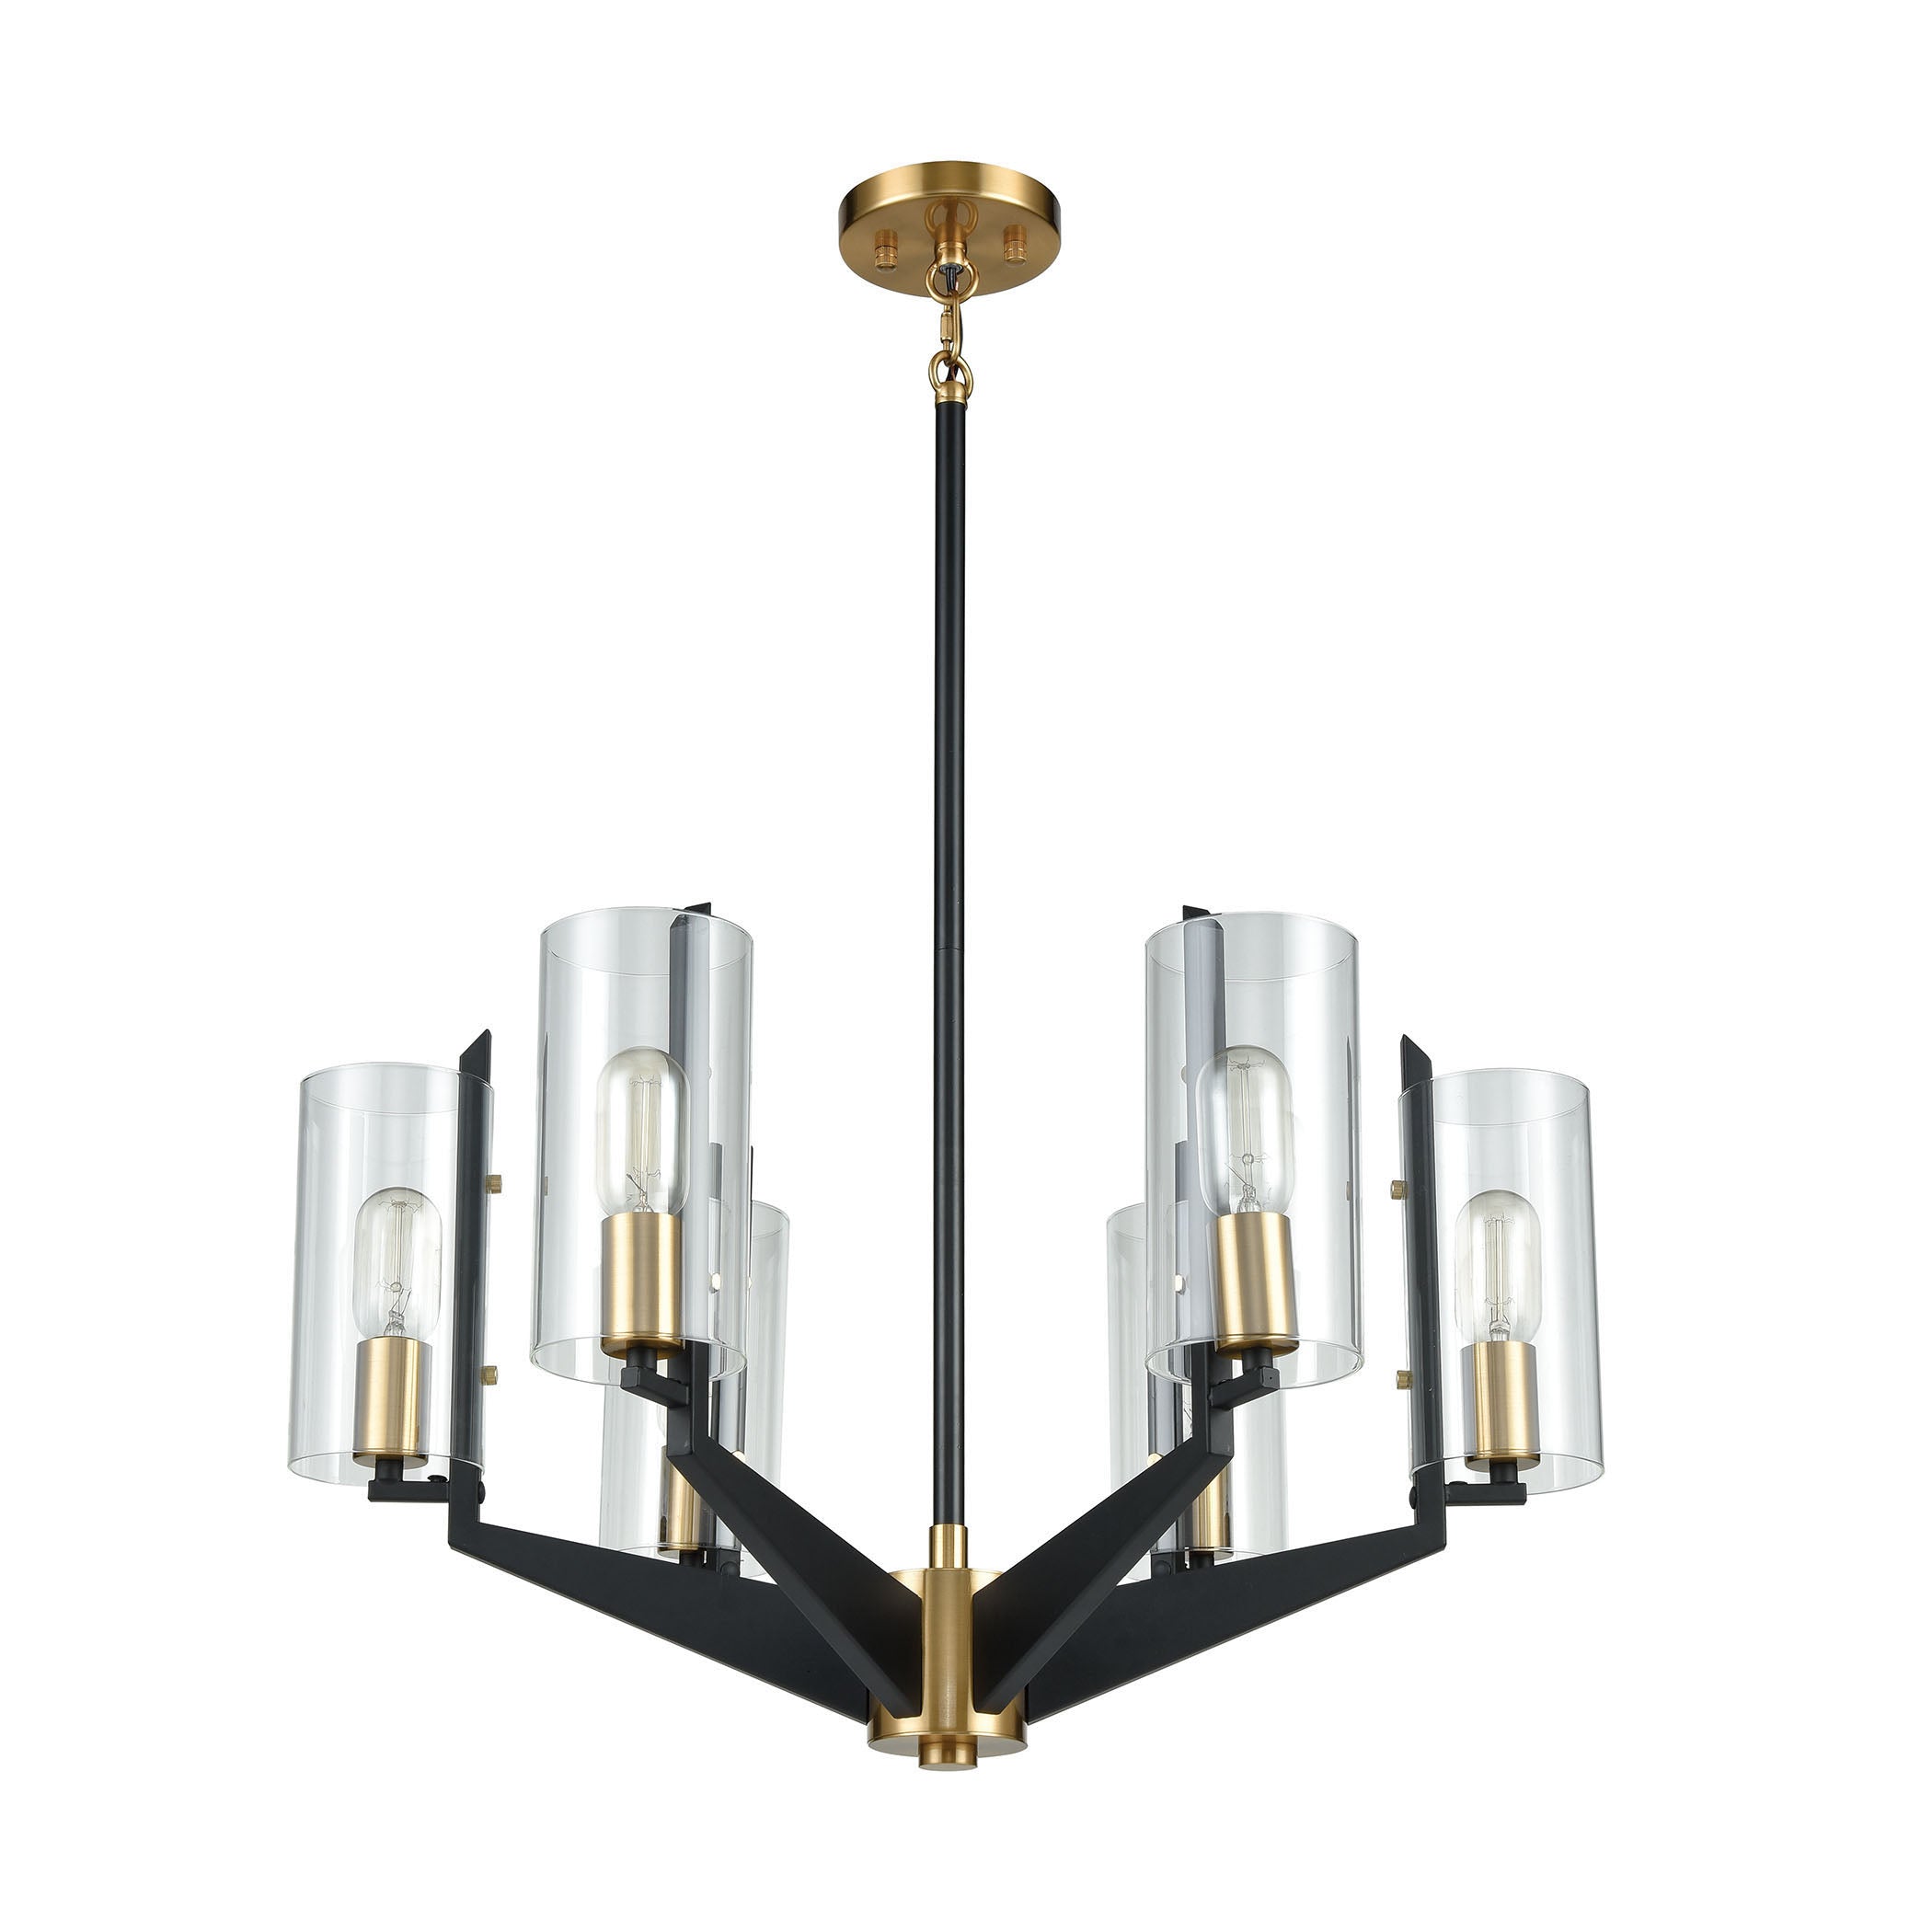 ELK Lighting 15315/6 Blakeslee 6-Light Chandelier in Matte Black and Satin Brass with Clear Glass